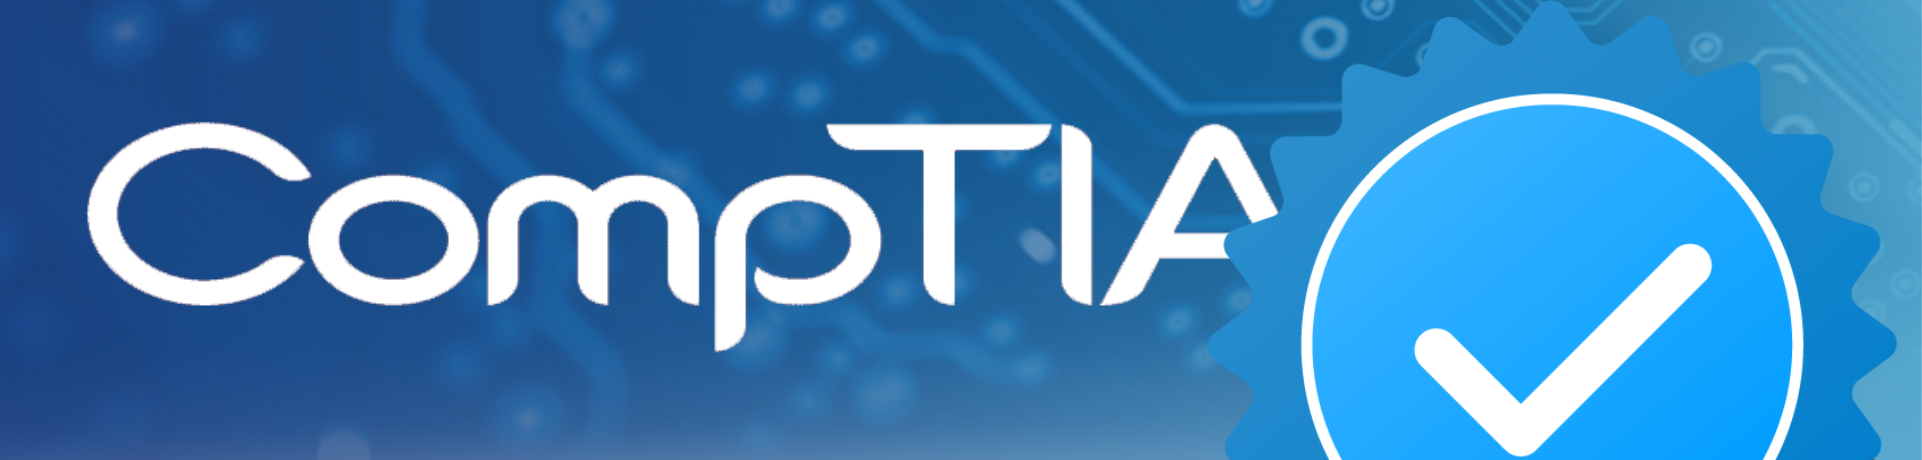 Top 10 Reasons IT Professionals Should Consider CompTIA Certification Programs featured image